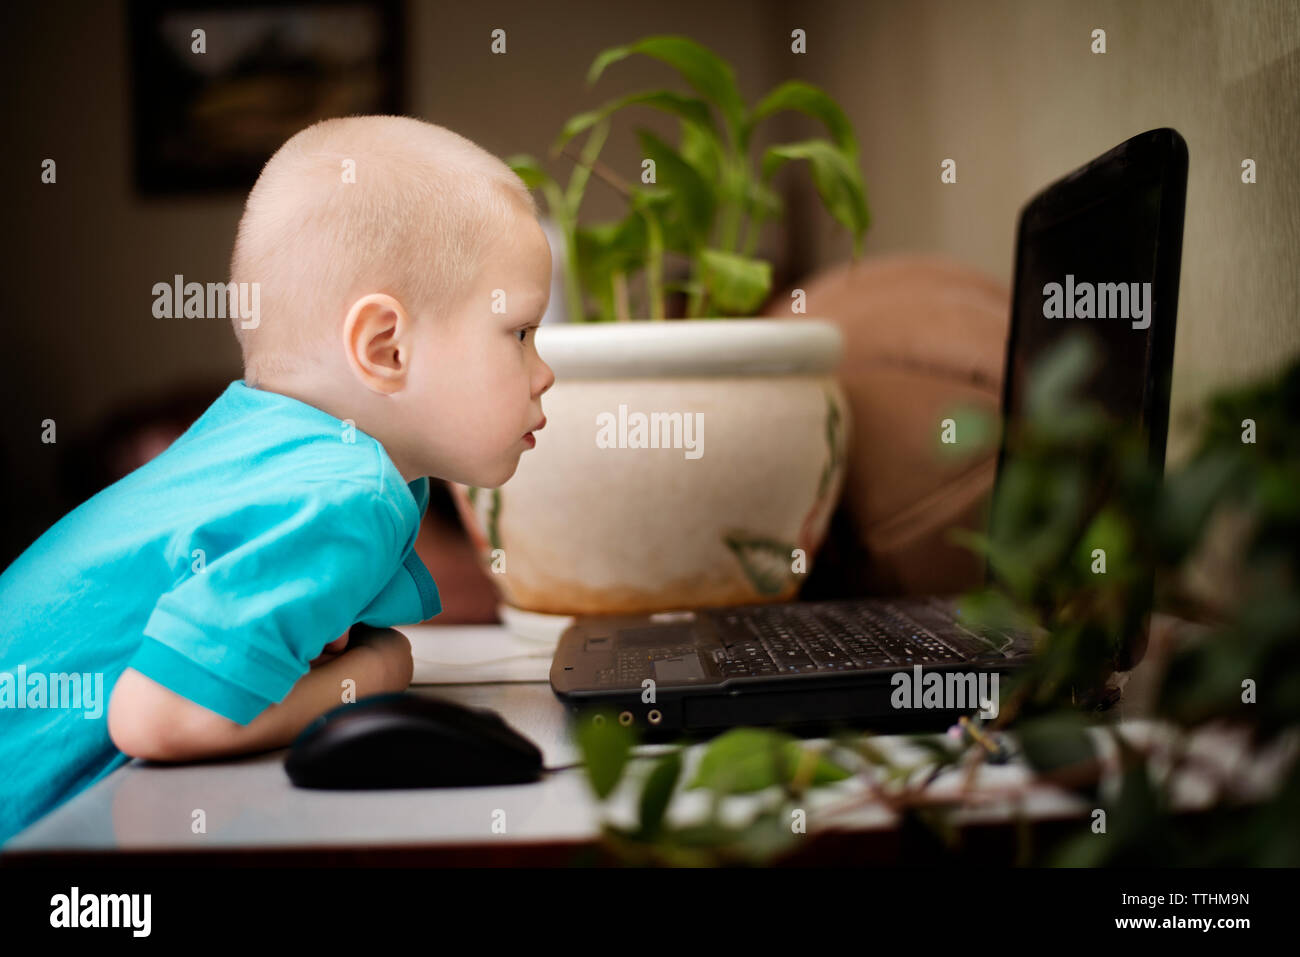 Profile view of curious boy looking at laptop screen in house Stock Photo